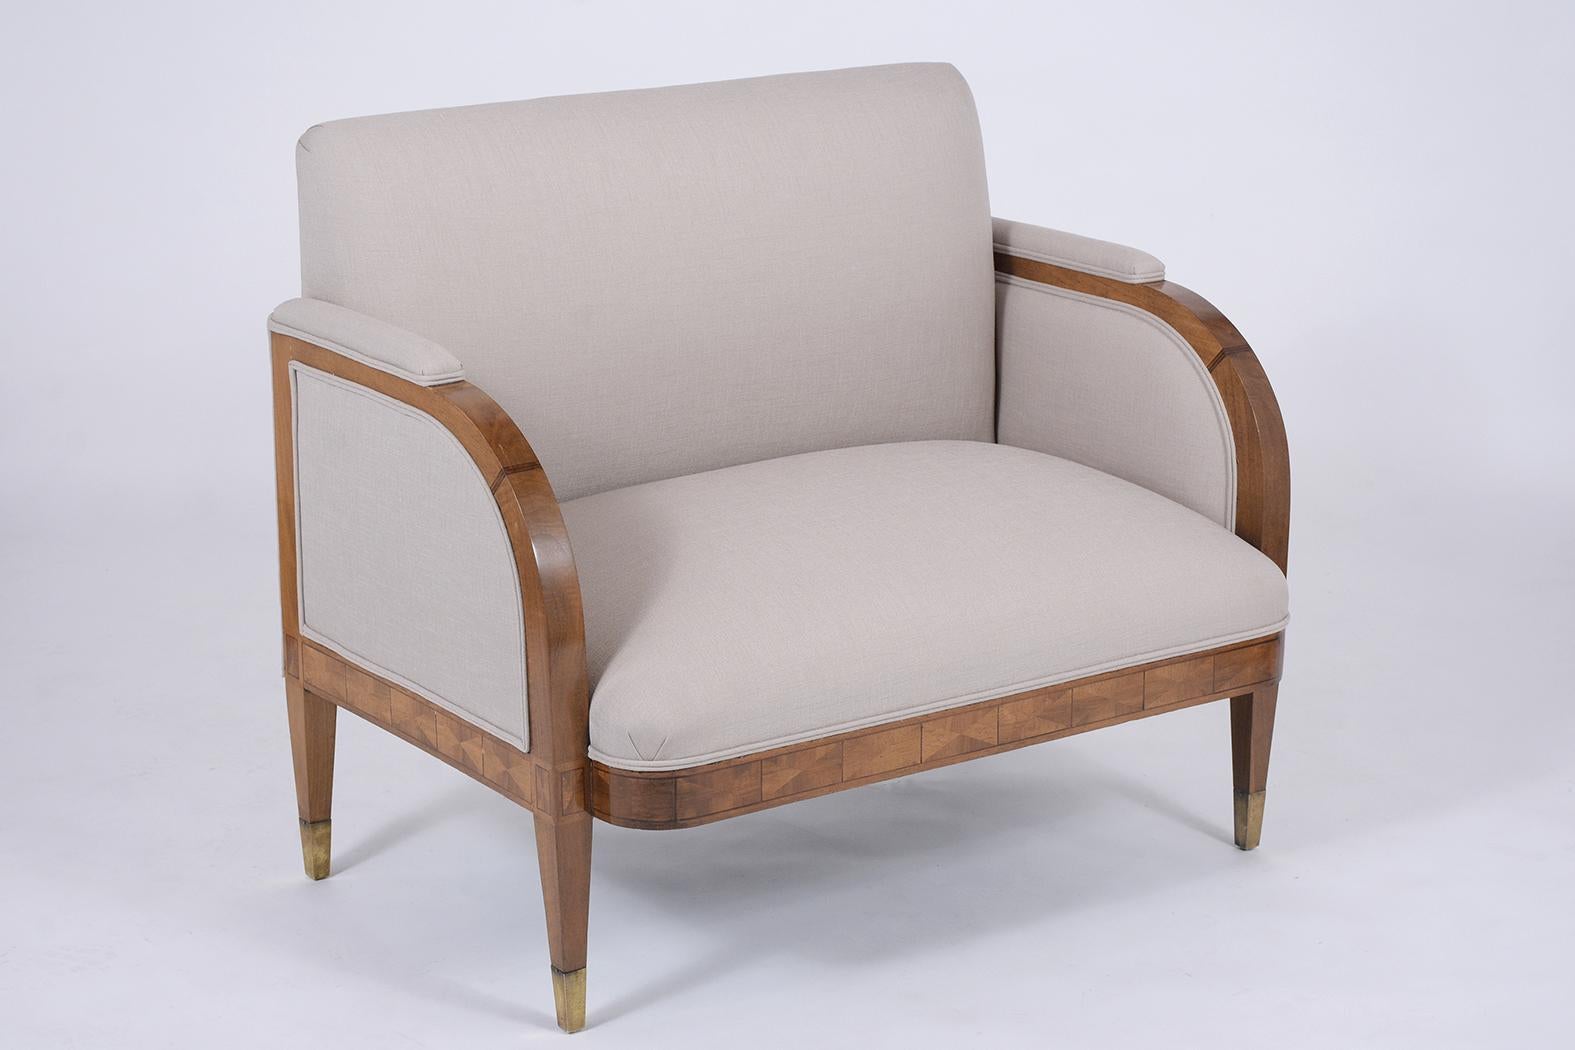 A French Art Deco loveseat handcrafted out of wood this elegant loveseat features a walnut finish. Eye-catching inlaid details arched armrests. This fabulous piece sits on carved tapered legs with brass toe cups a comfortable seat and a backrest